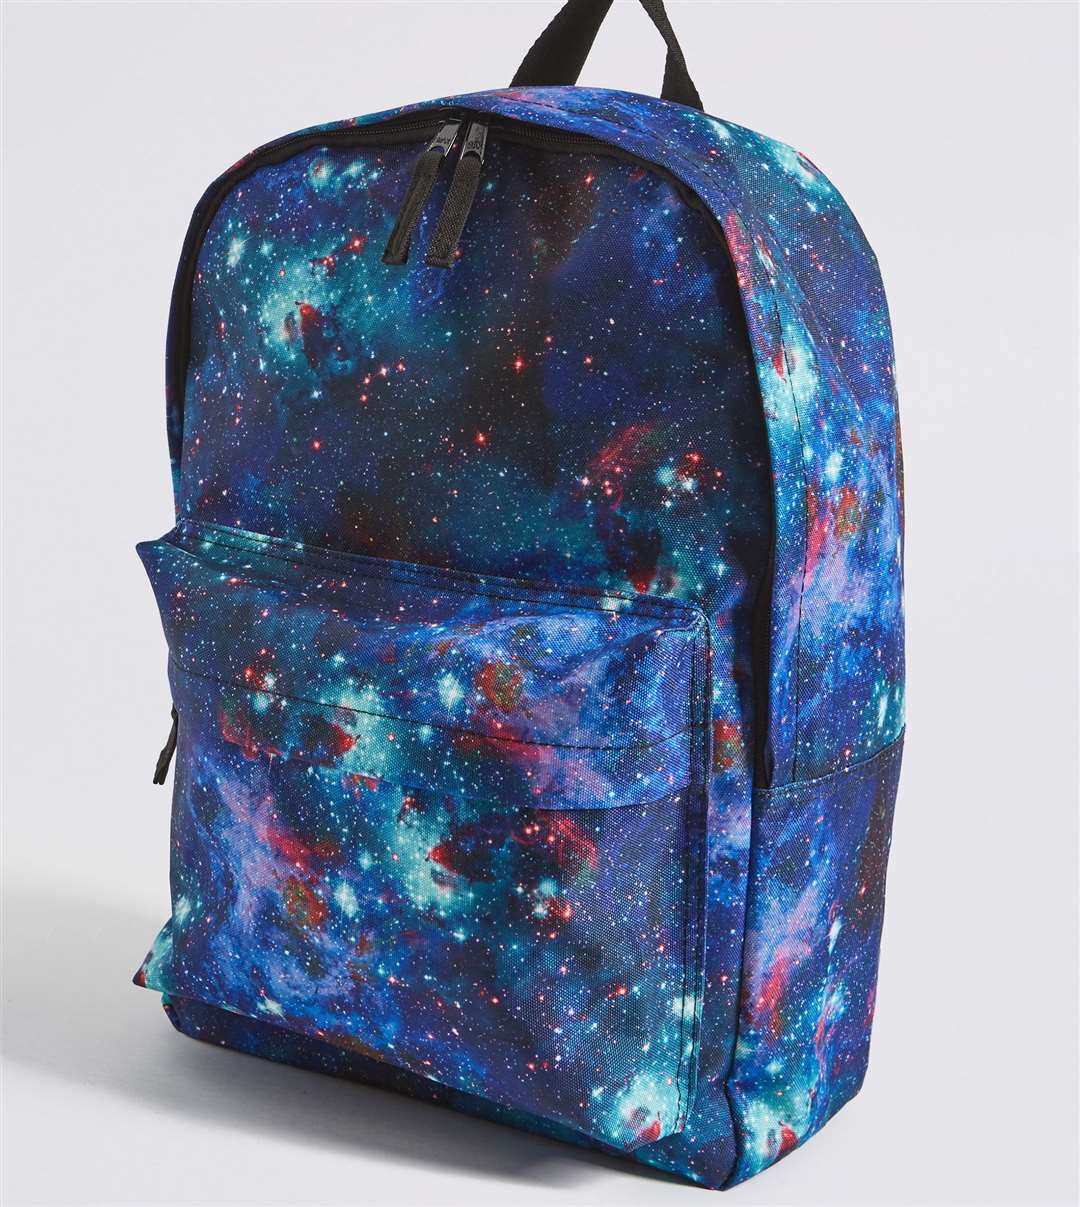 Space water repellent back pack, £20 from M&S